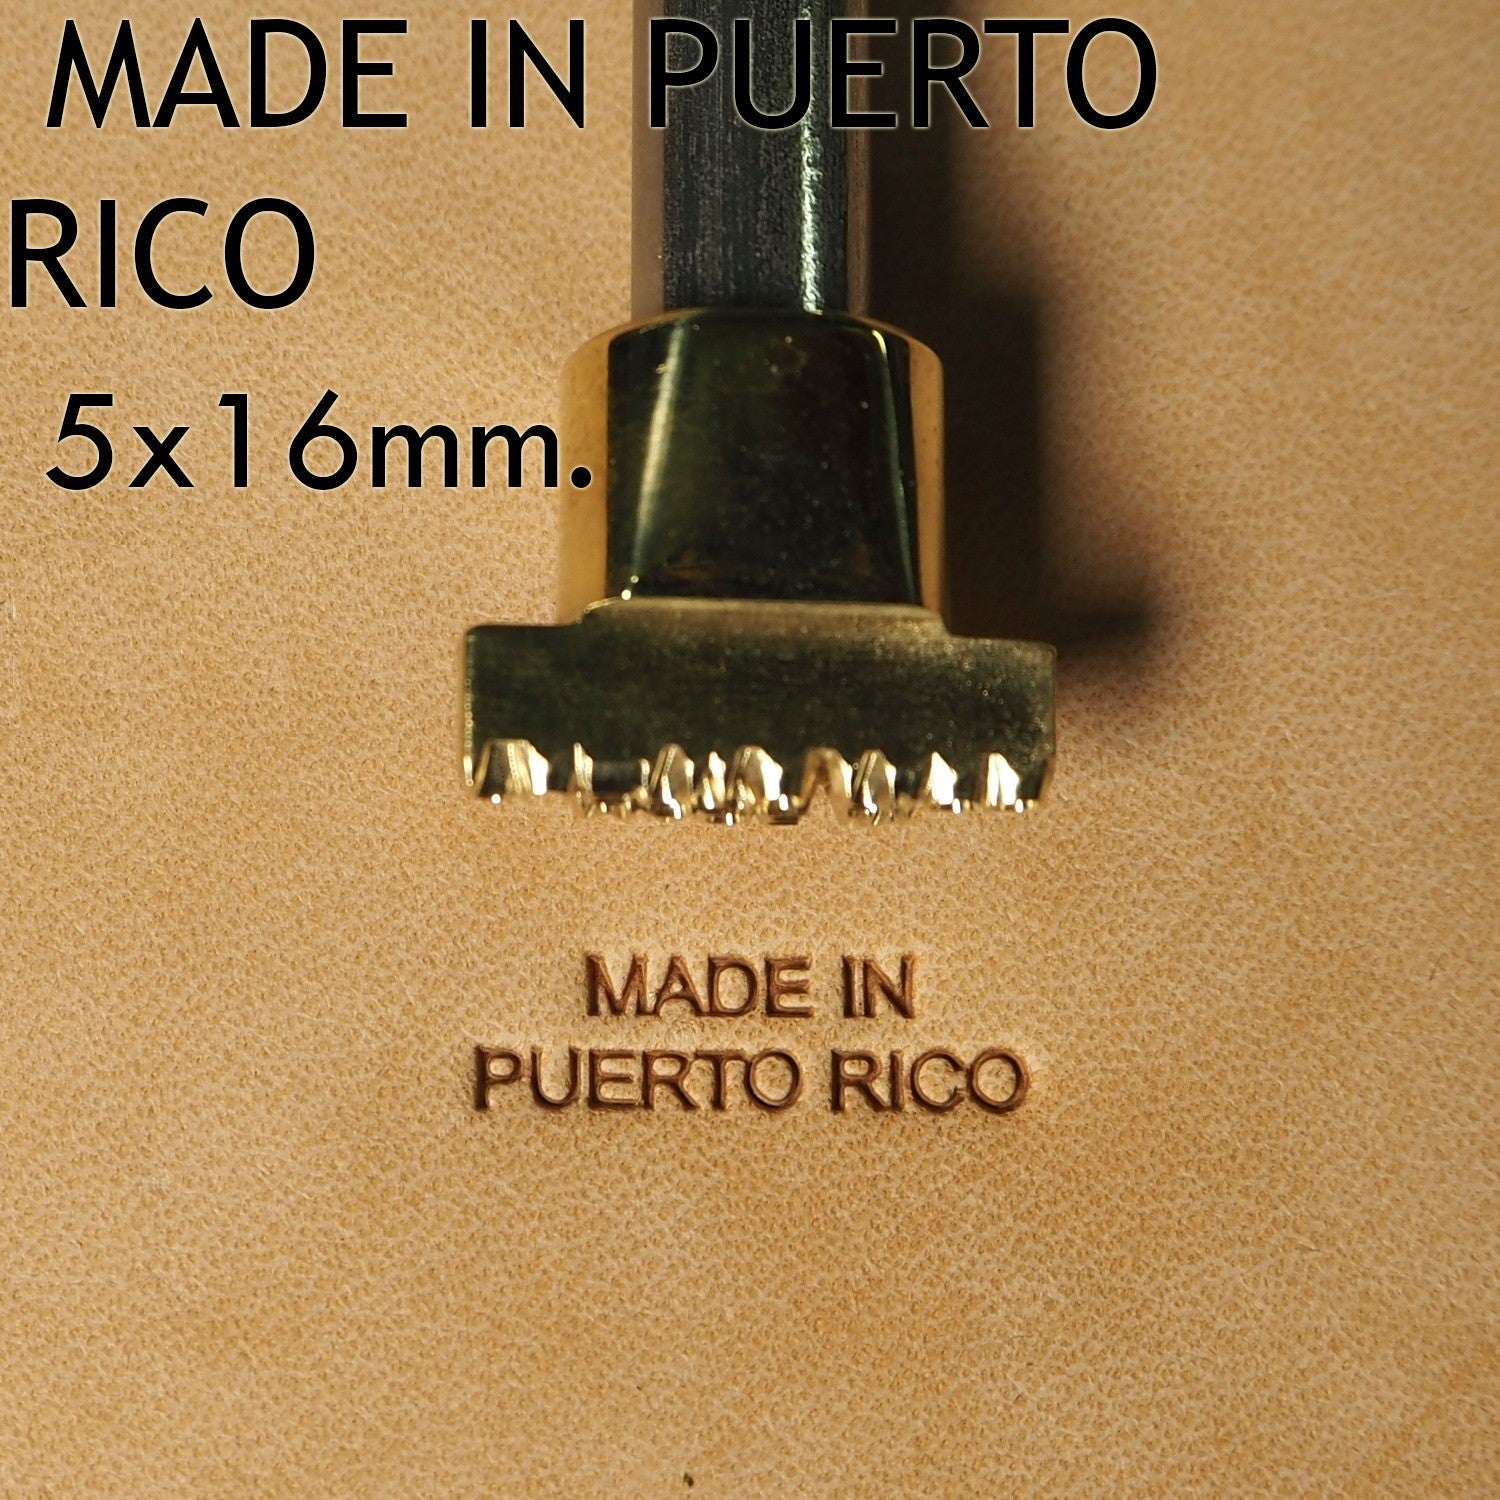 #Made In Puerto Rico - Leather Crafting Stamp Tool